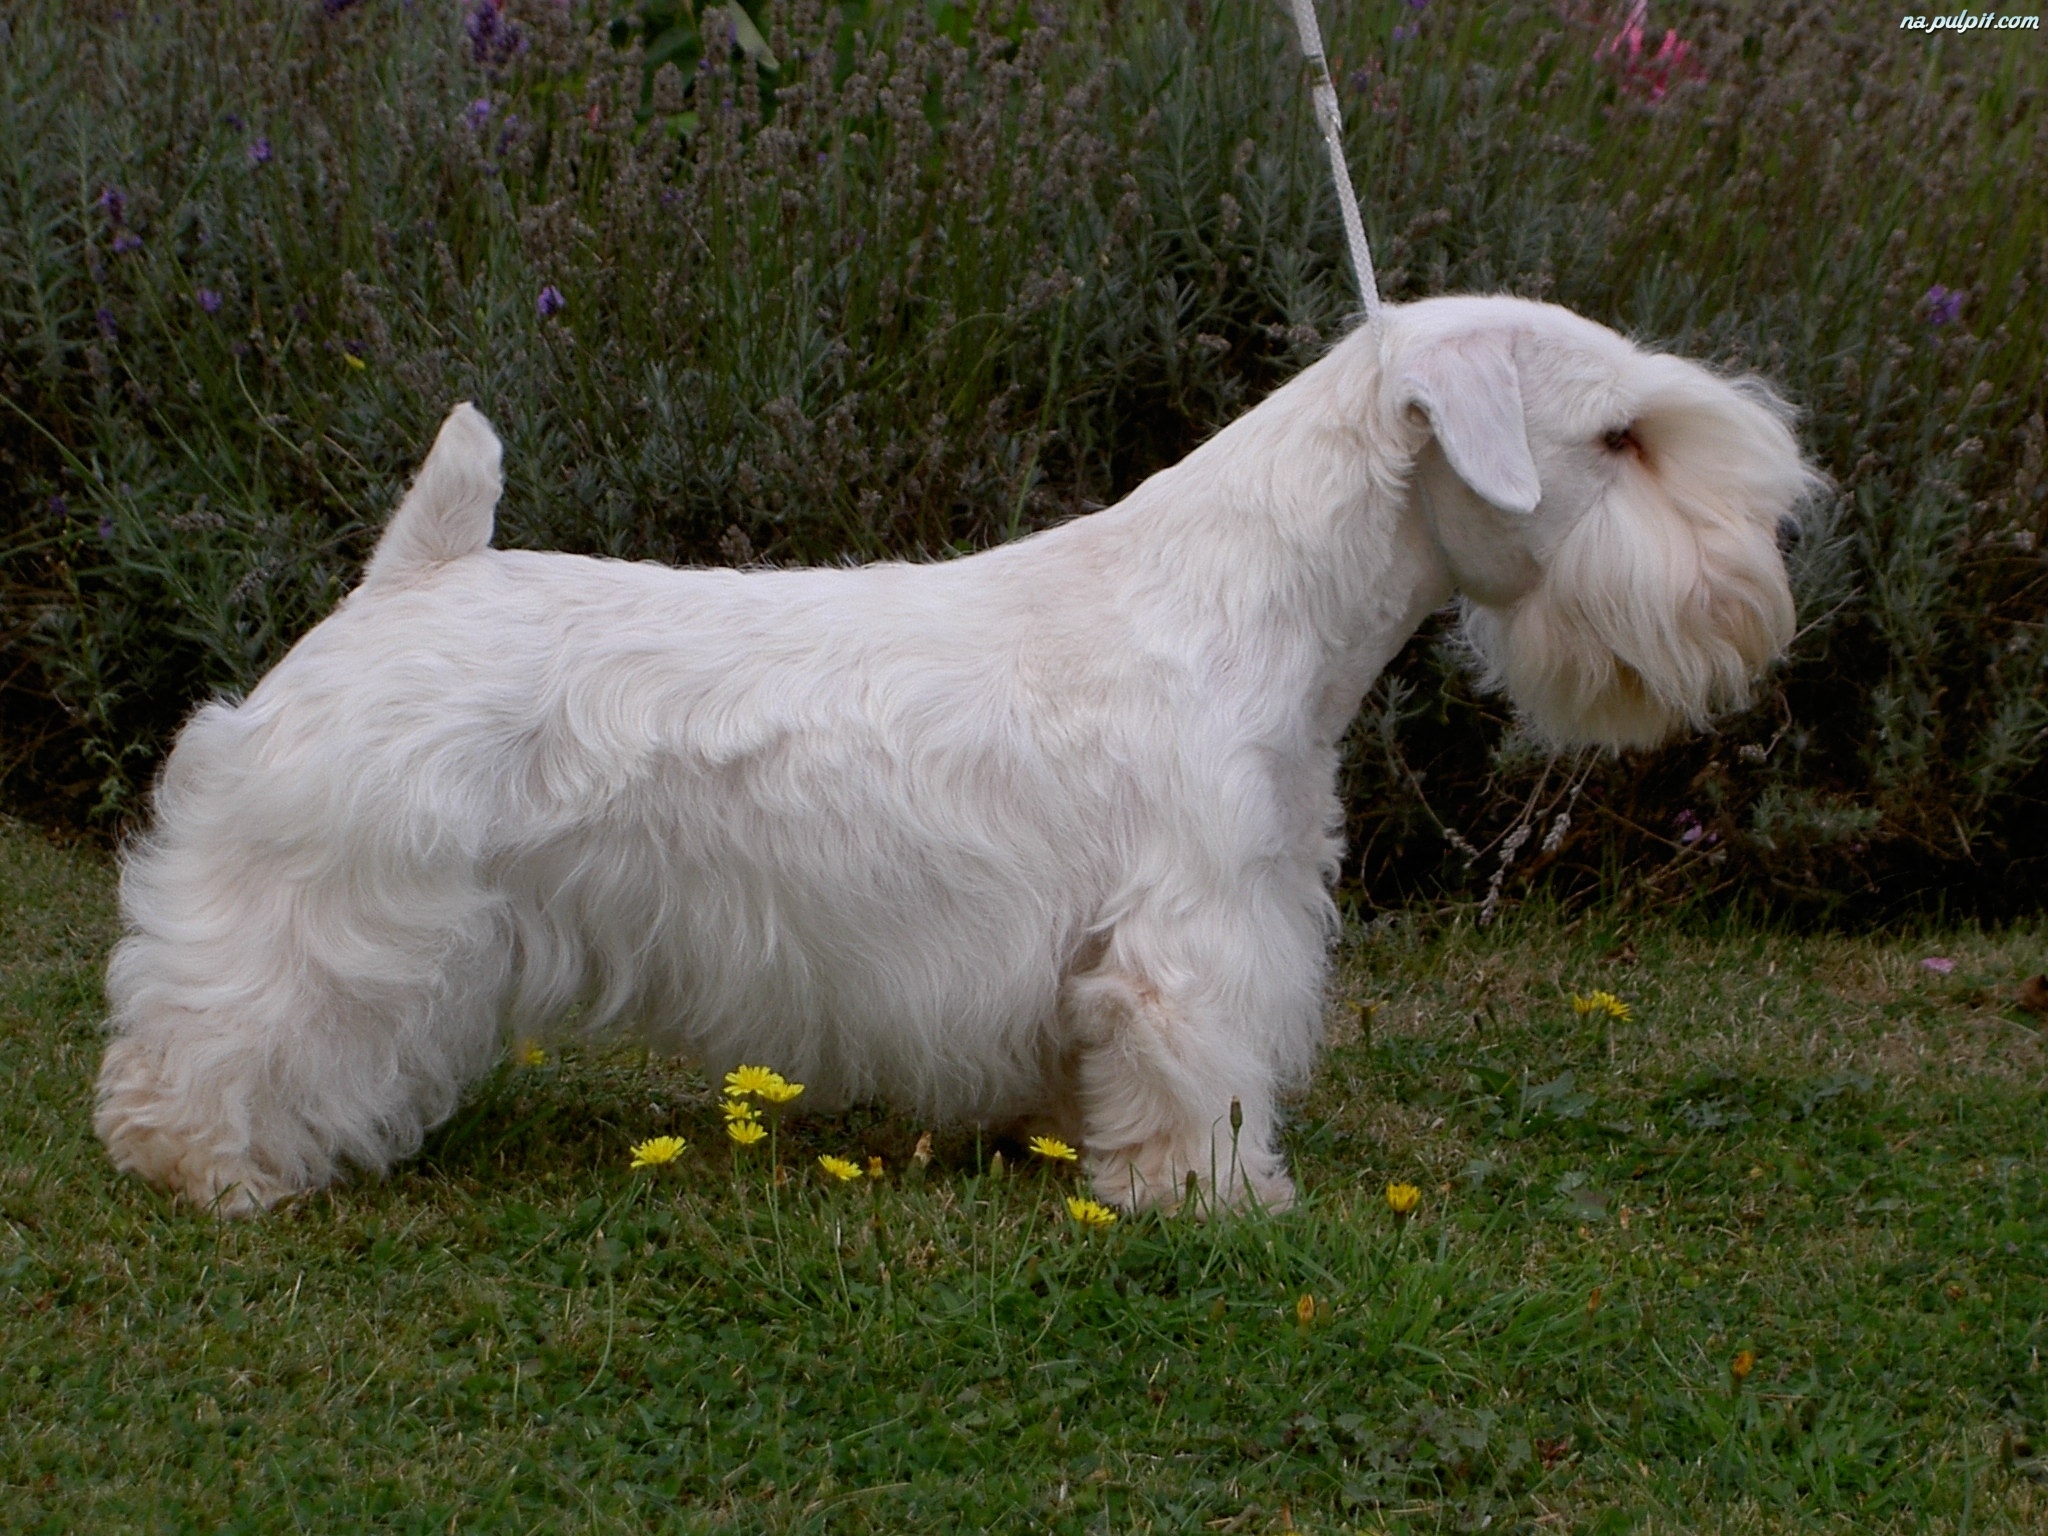 Sealyham Terrier Dog: Sealyham Sealyham Terrier Dog In The Forest Breed